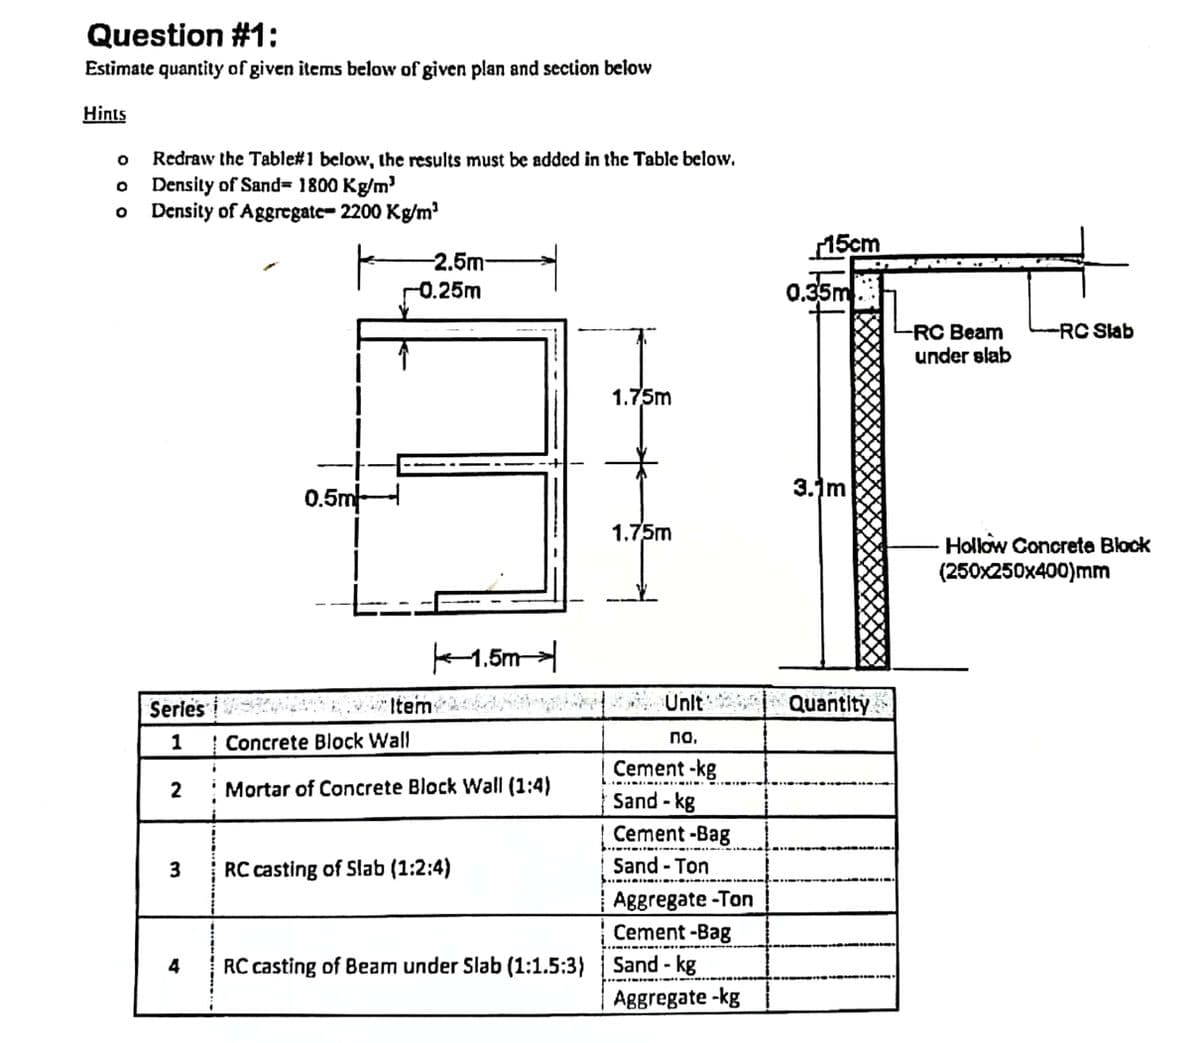 Question #1:
Estimate quantity of given items below of given plan and section below
Hints
o Redraw the Table#1 below, the results must be added in the Table below.
Density of Sand= 1800 Kg/m'
o Density of Aggregatc- 2200 Kg/m?
15cm
2.5m-
r0.25m
0.35m
LRC Beam
under slab
-RC Slab
1.75m
3.1m
0.5m
1.75m
Hollow Concrete Block
(250x250x400)mm
K1.5m-
Serles i
Item
* Ünlt
Quantity
1
| Concrete Block Wall
no.
Cement -kg
2
Mortar of Concrete Block Wall (1:4)
Sand - kg
Cement -Bag
3
RC casting of Slab (1:2:4)
Sand - Ton
Aggregate-Ton
Cement -Bag
RC casting of Beam under Slab (1:1.5:3) Sand - kg
Aggregate -kg
4
